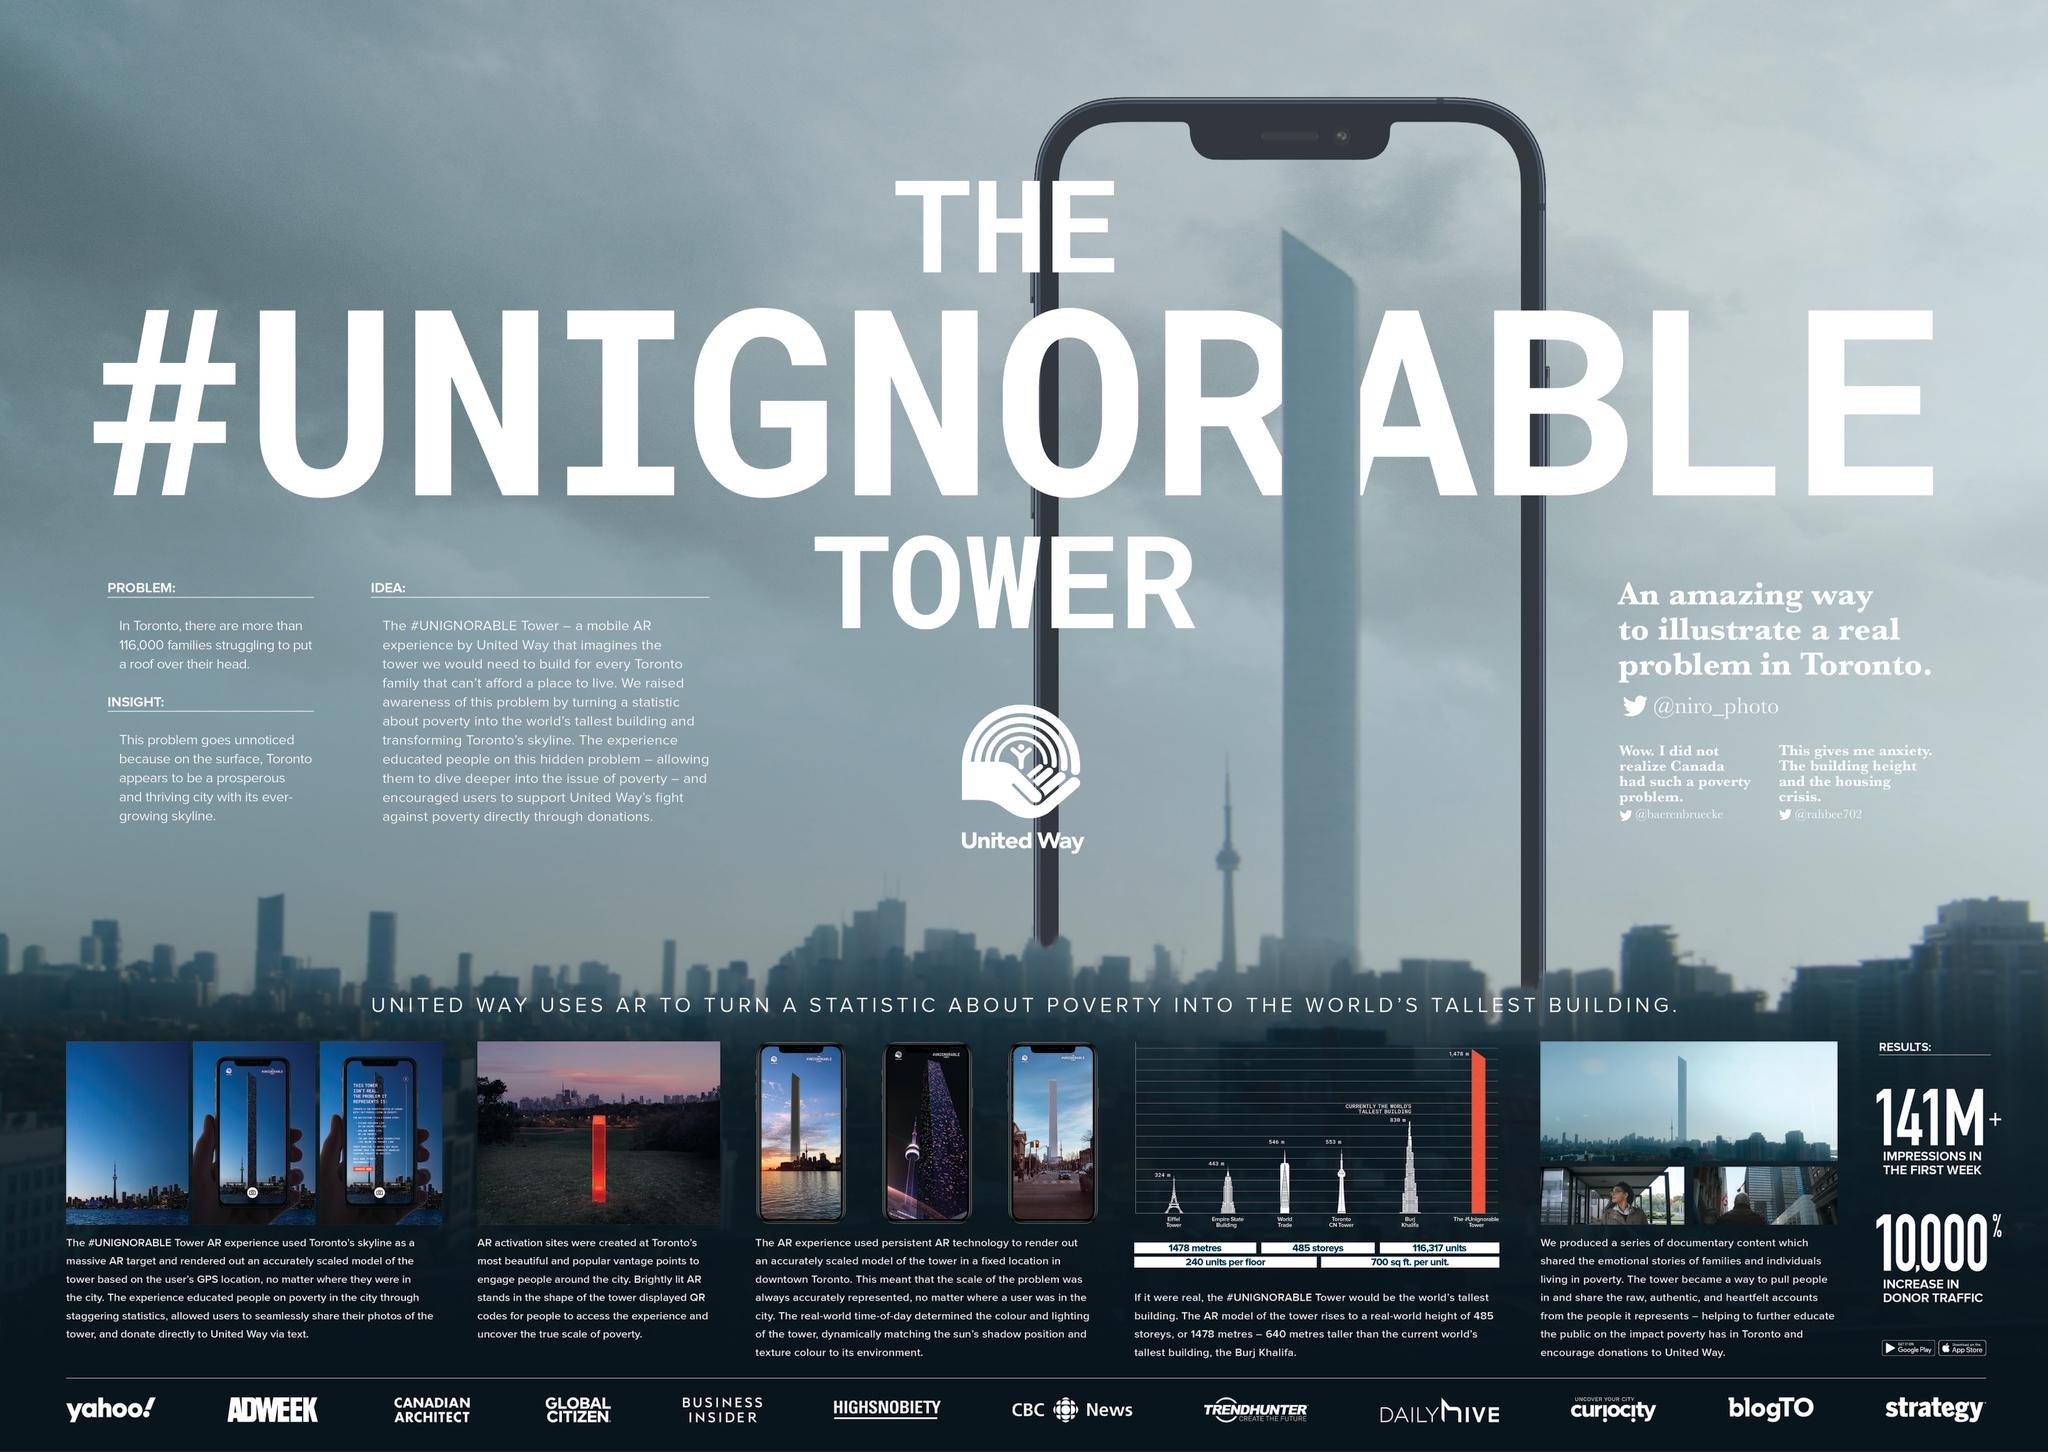 THE #UNIGNORABLE TOWER